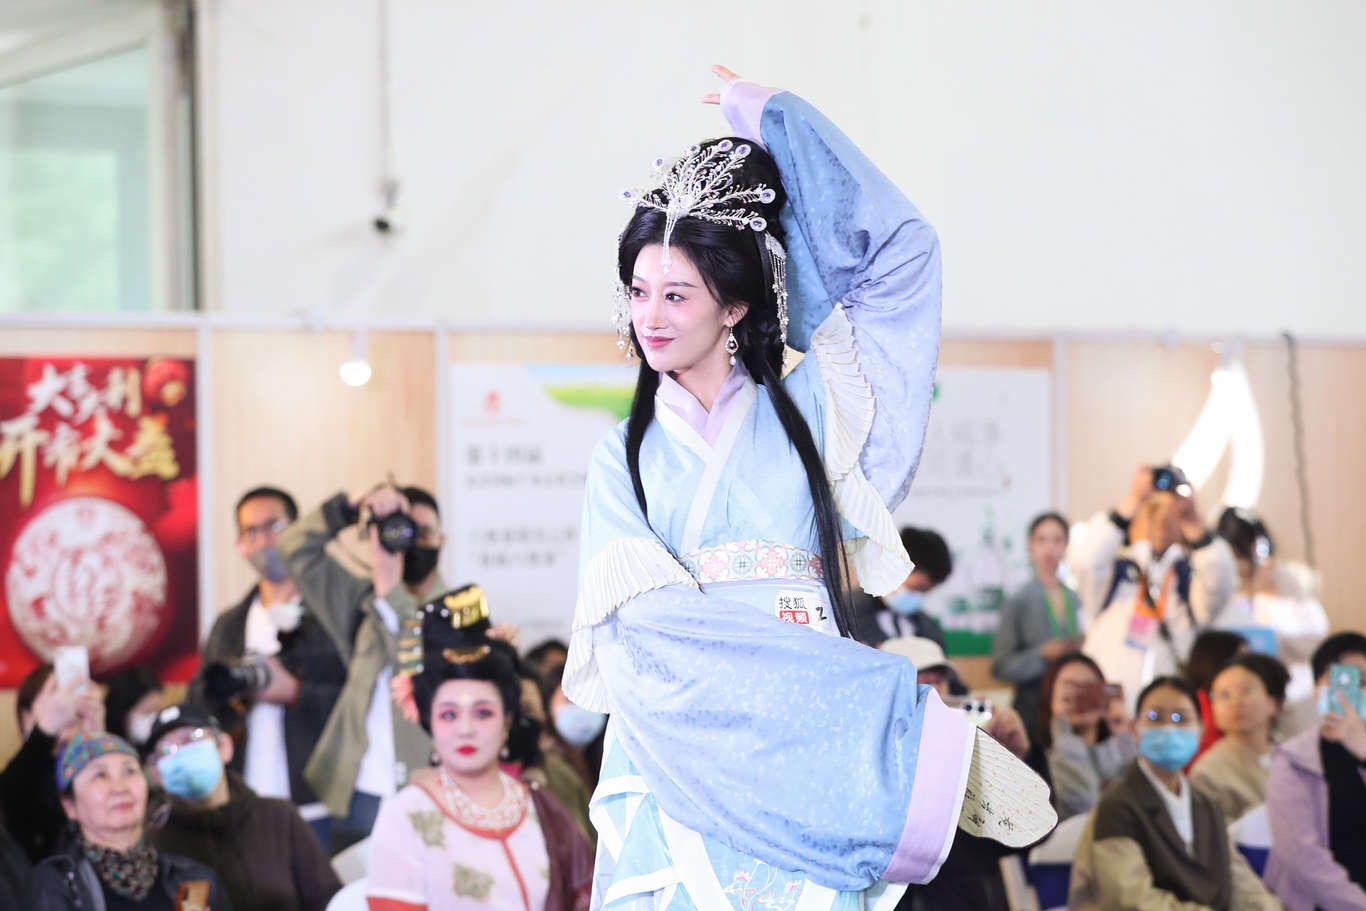 Chinese tea and traditional clothing continued to lead the 